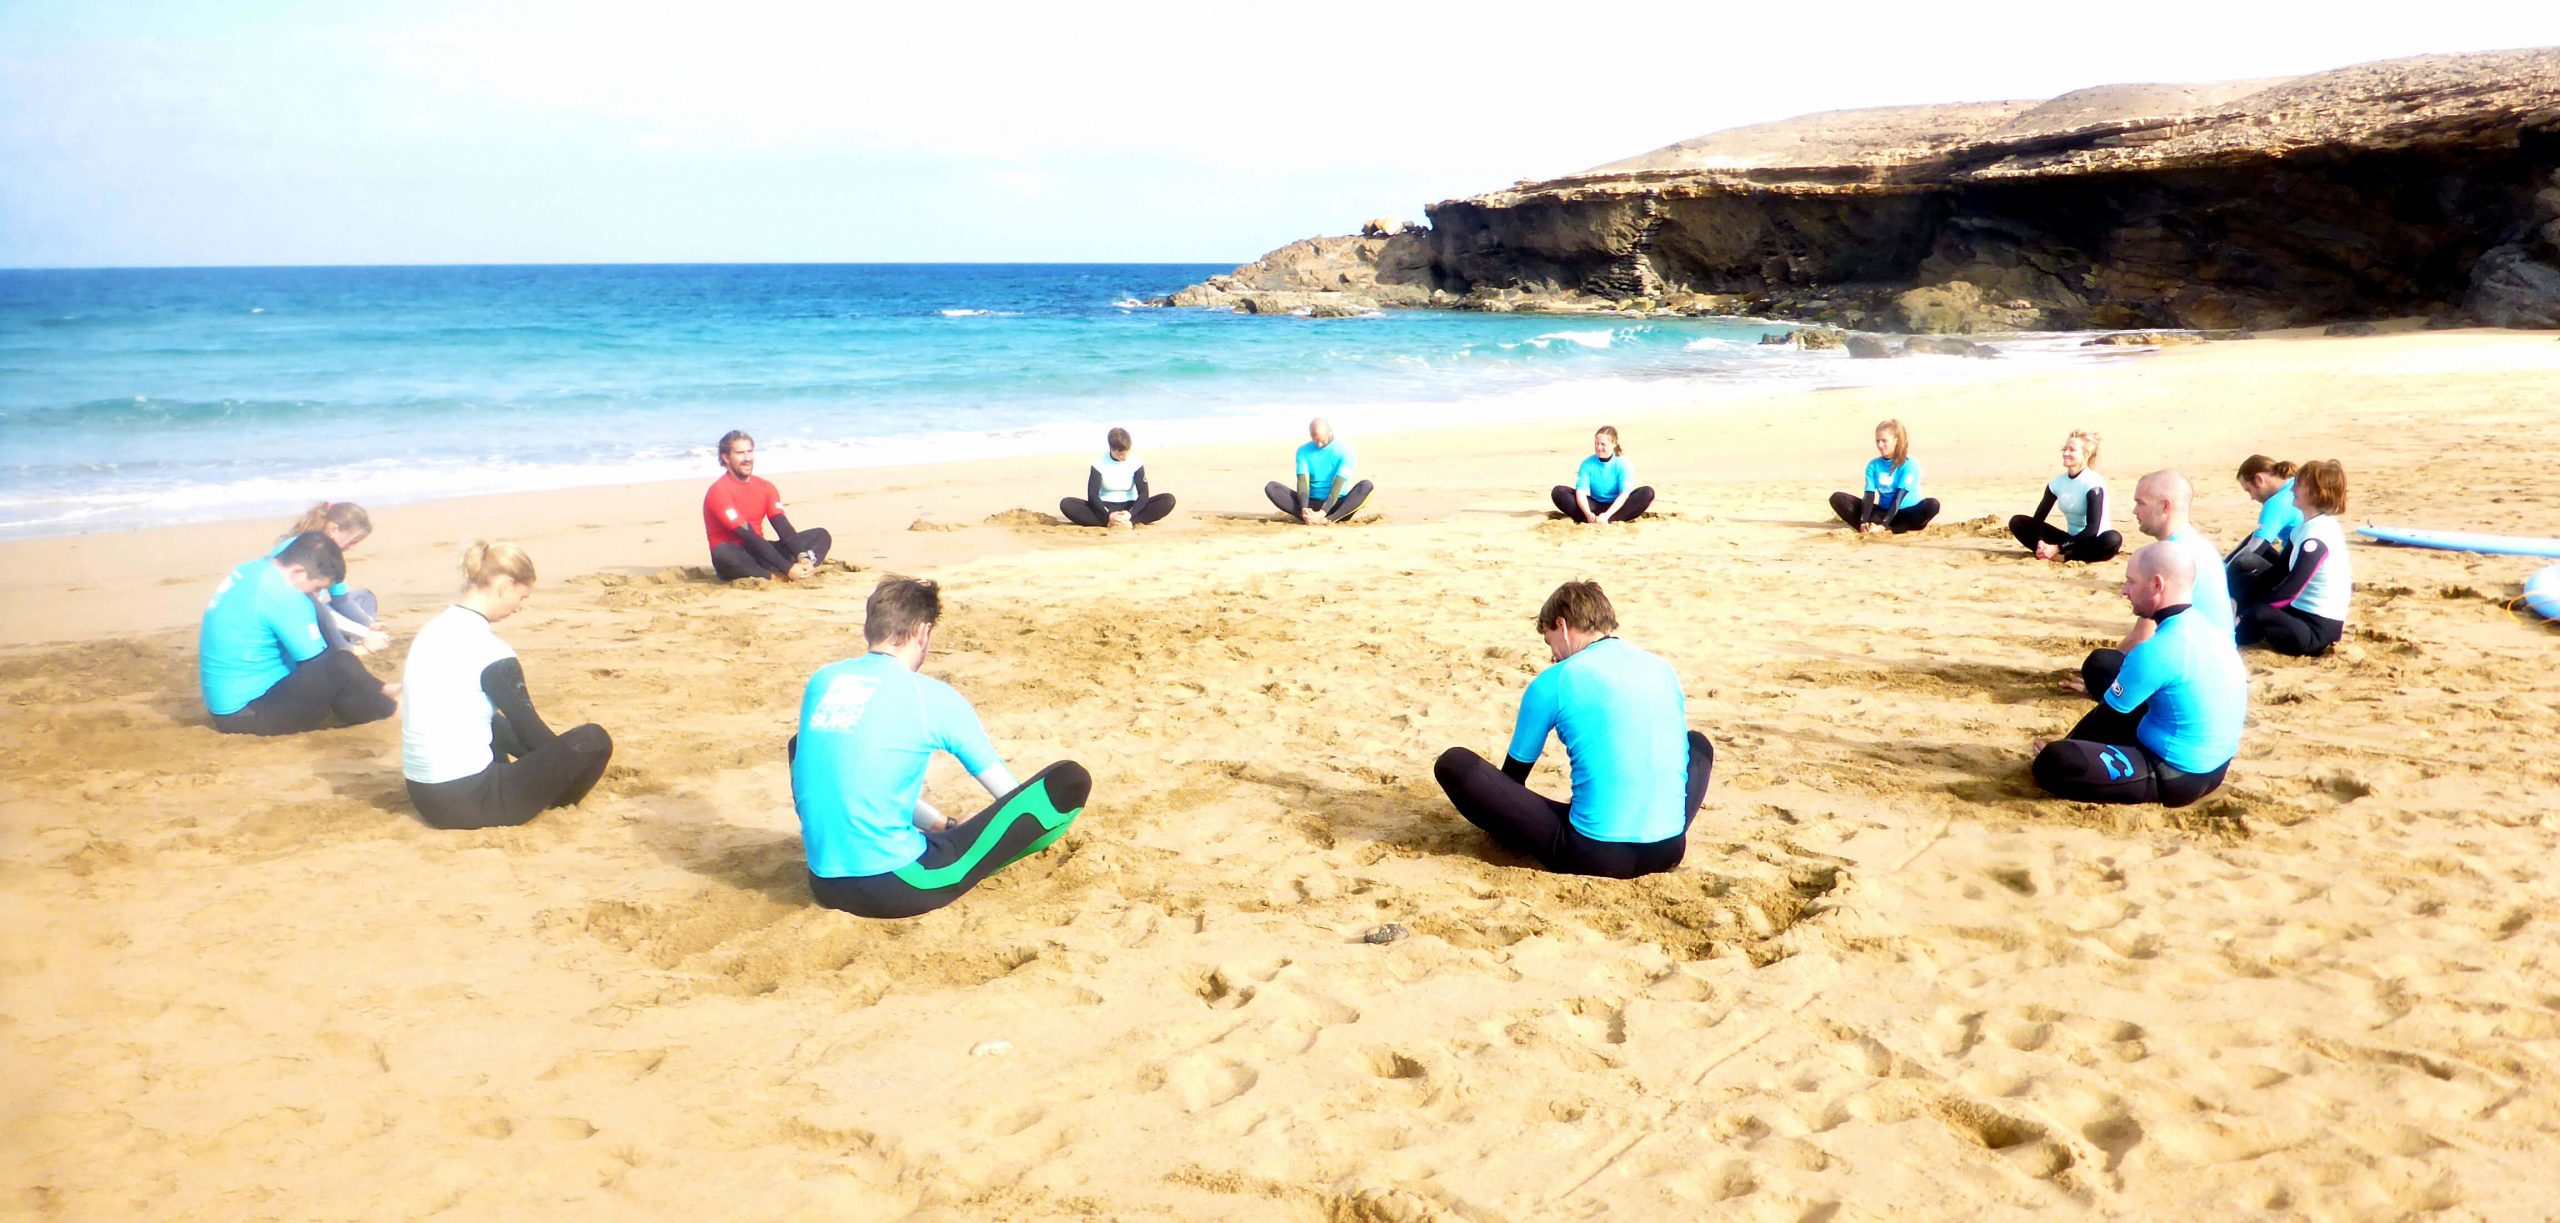 Escaping the European Winter – surfing in December on Fuerteventura. Our surf lessons on 29 of December 2014